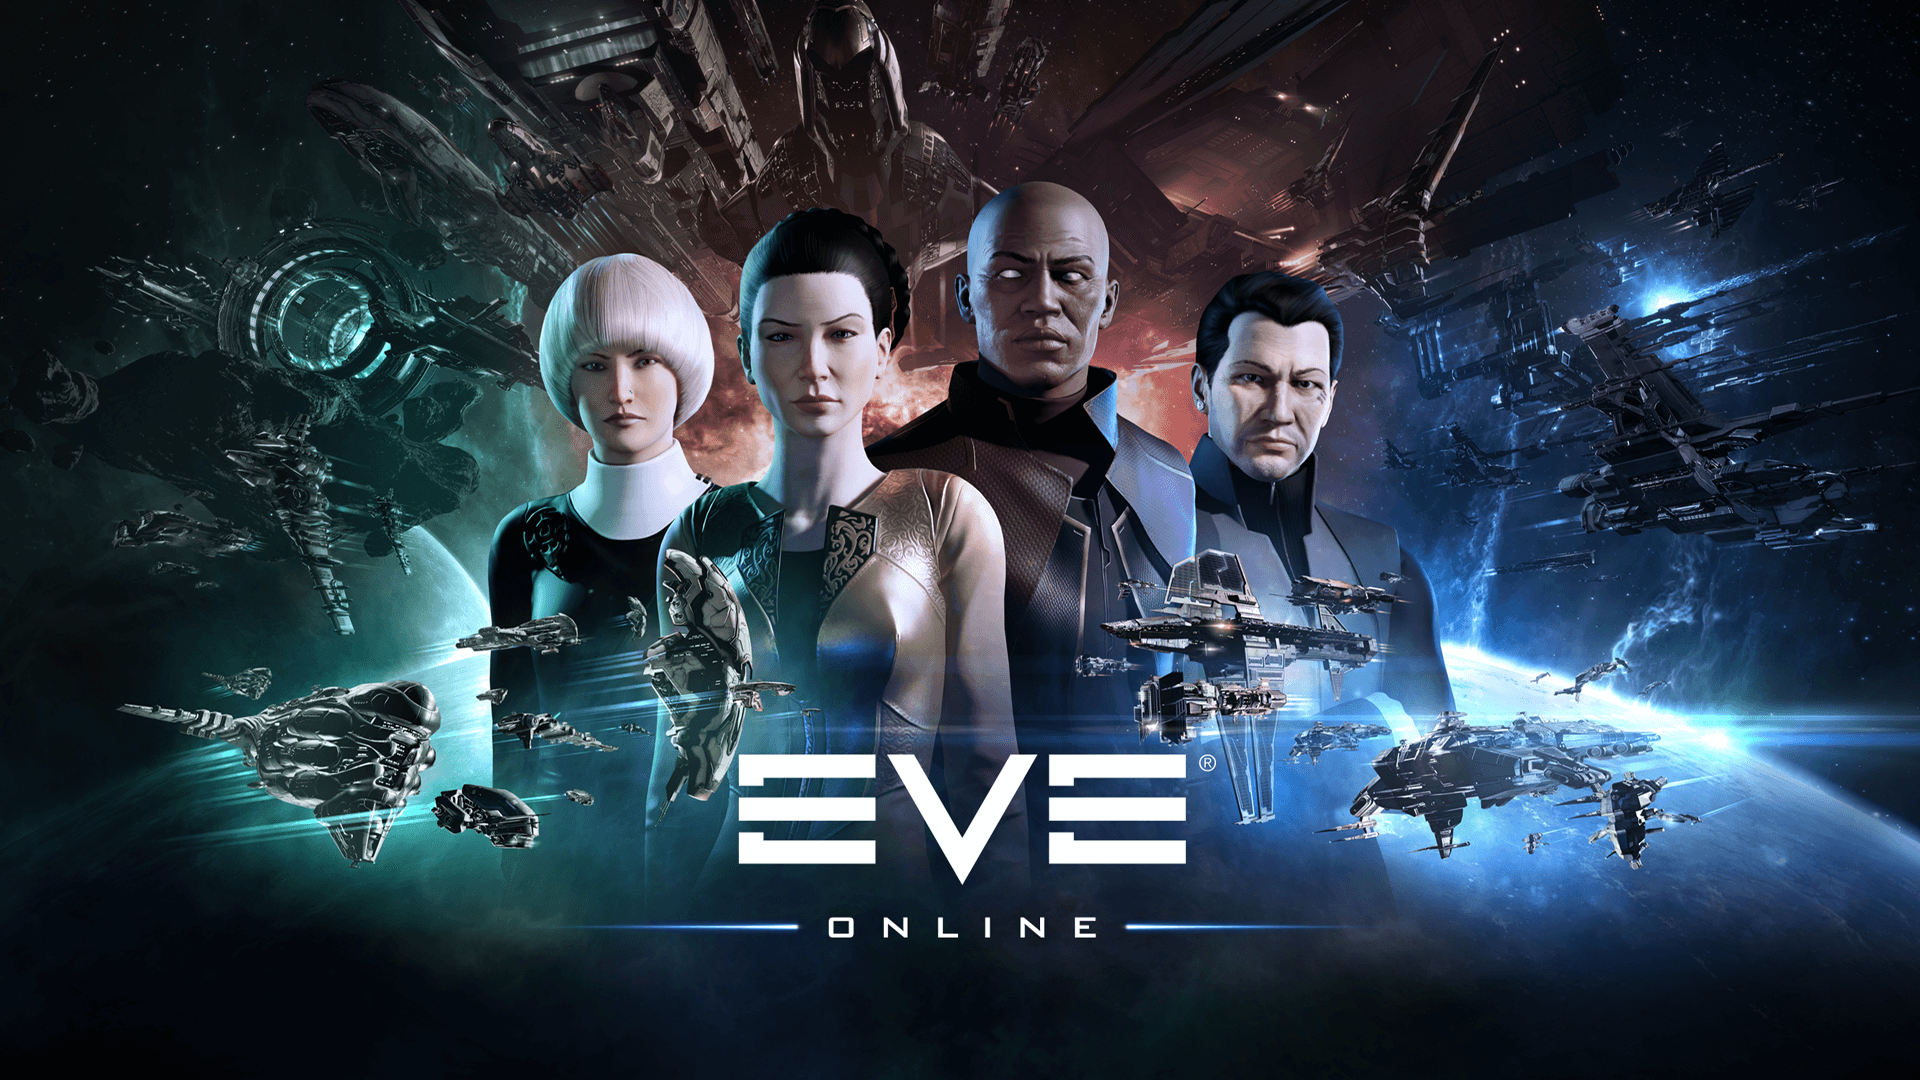 Eve online game cover